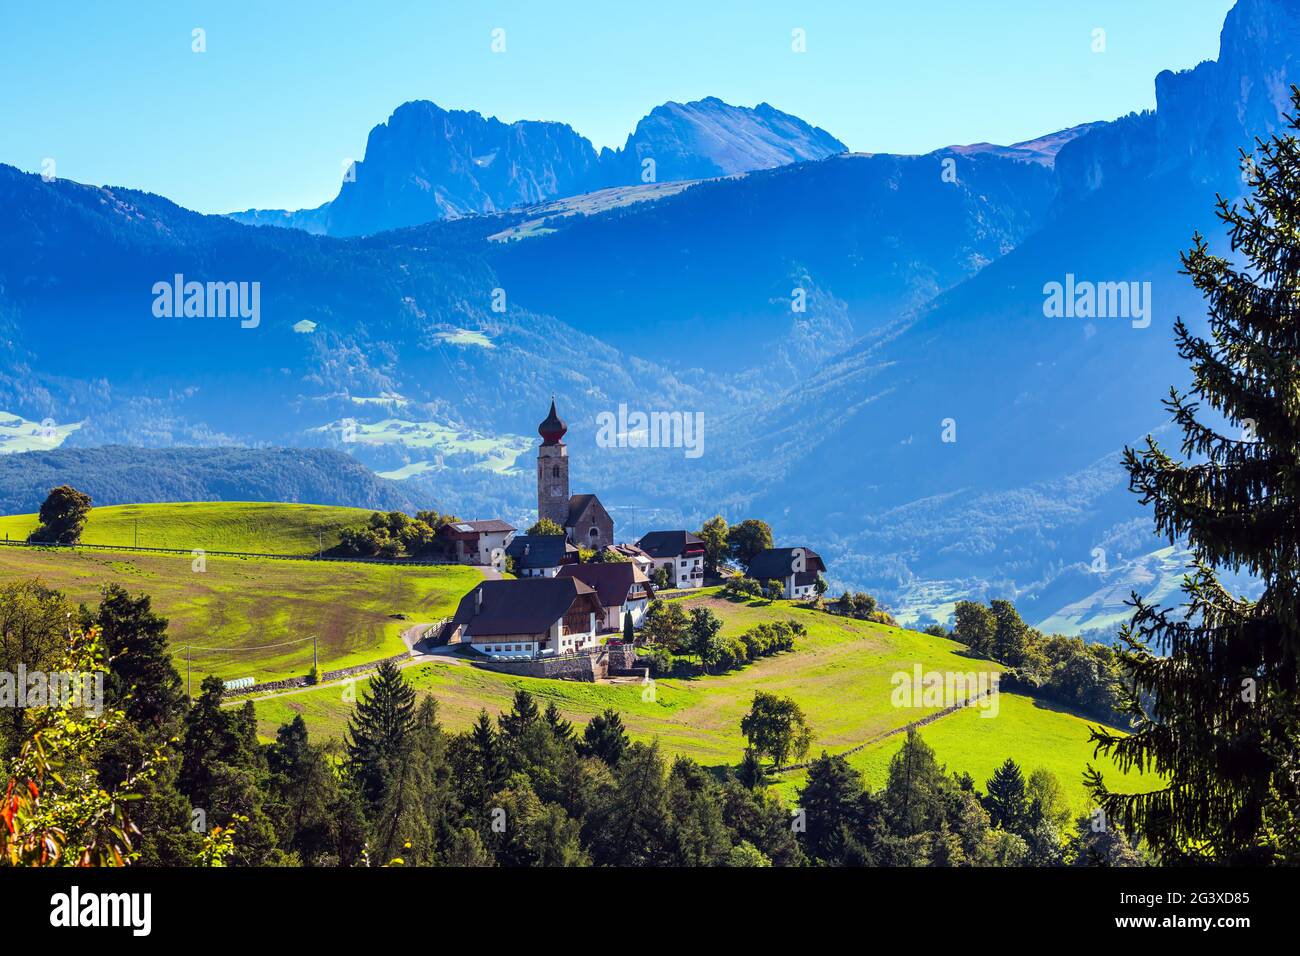 Fairy-tale country Stock Photo